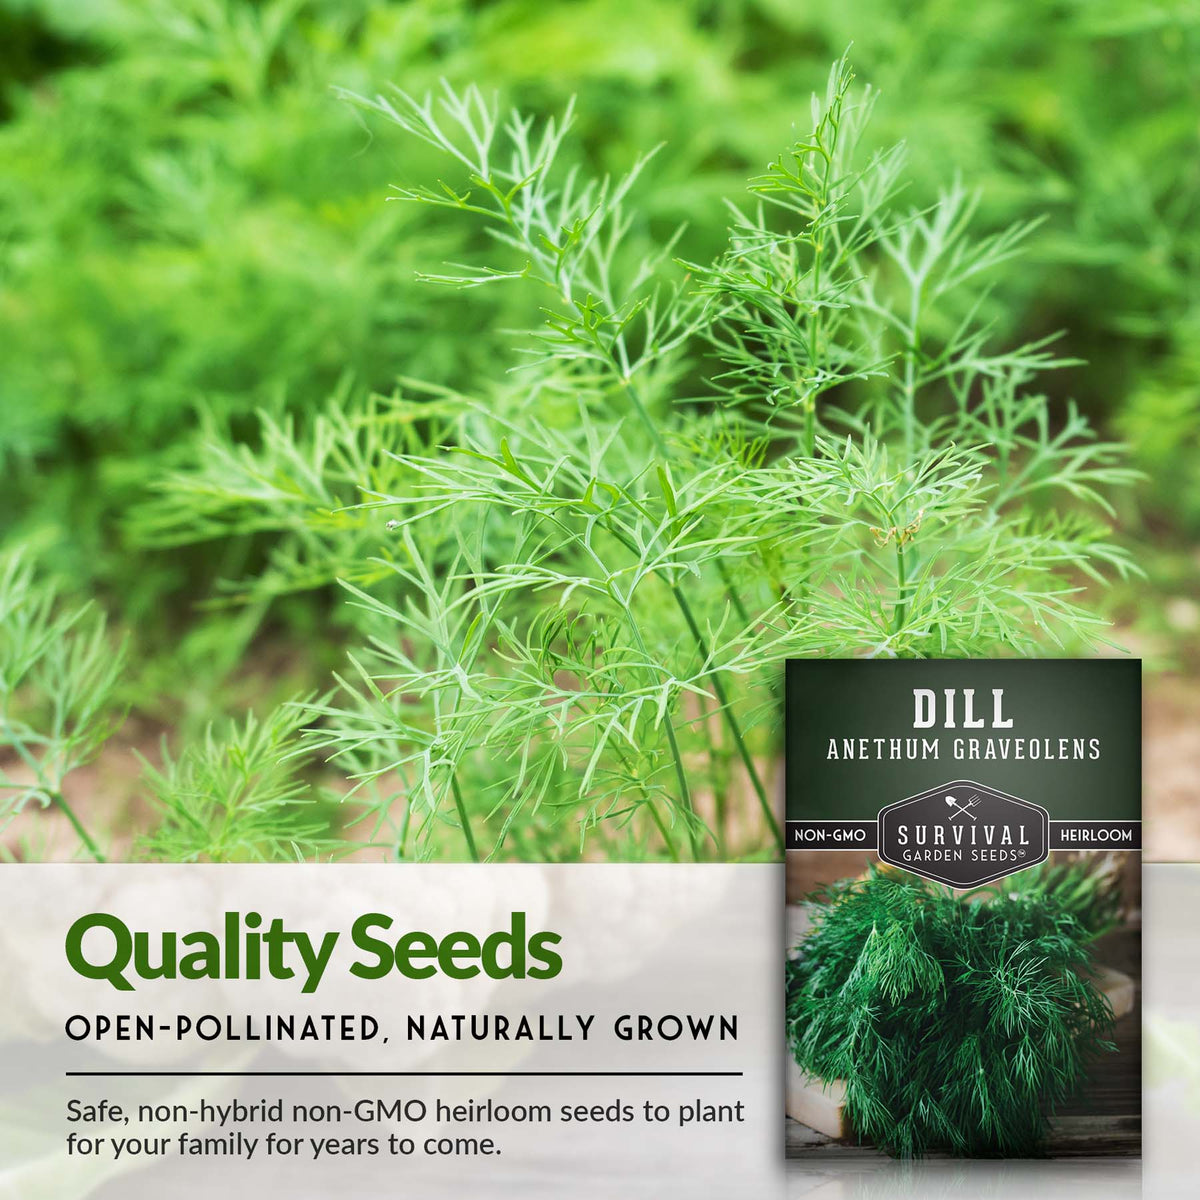 Open pollinated non-hybrid Dill seeds